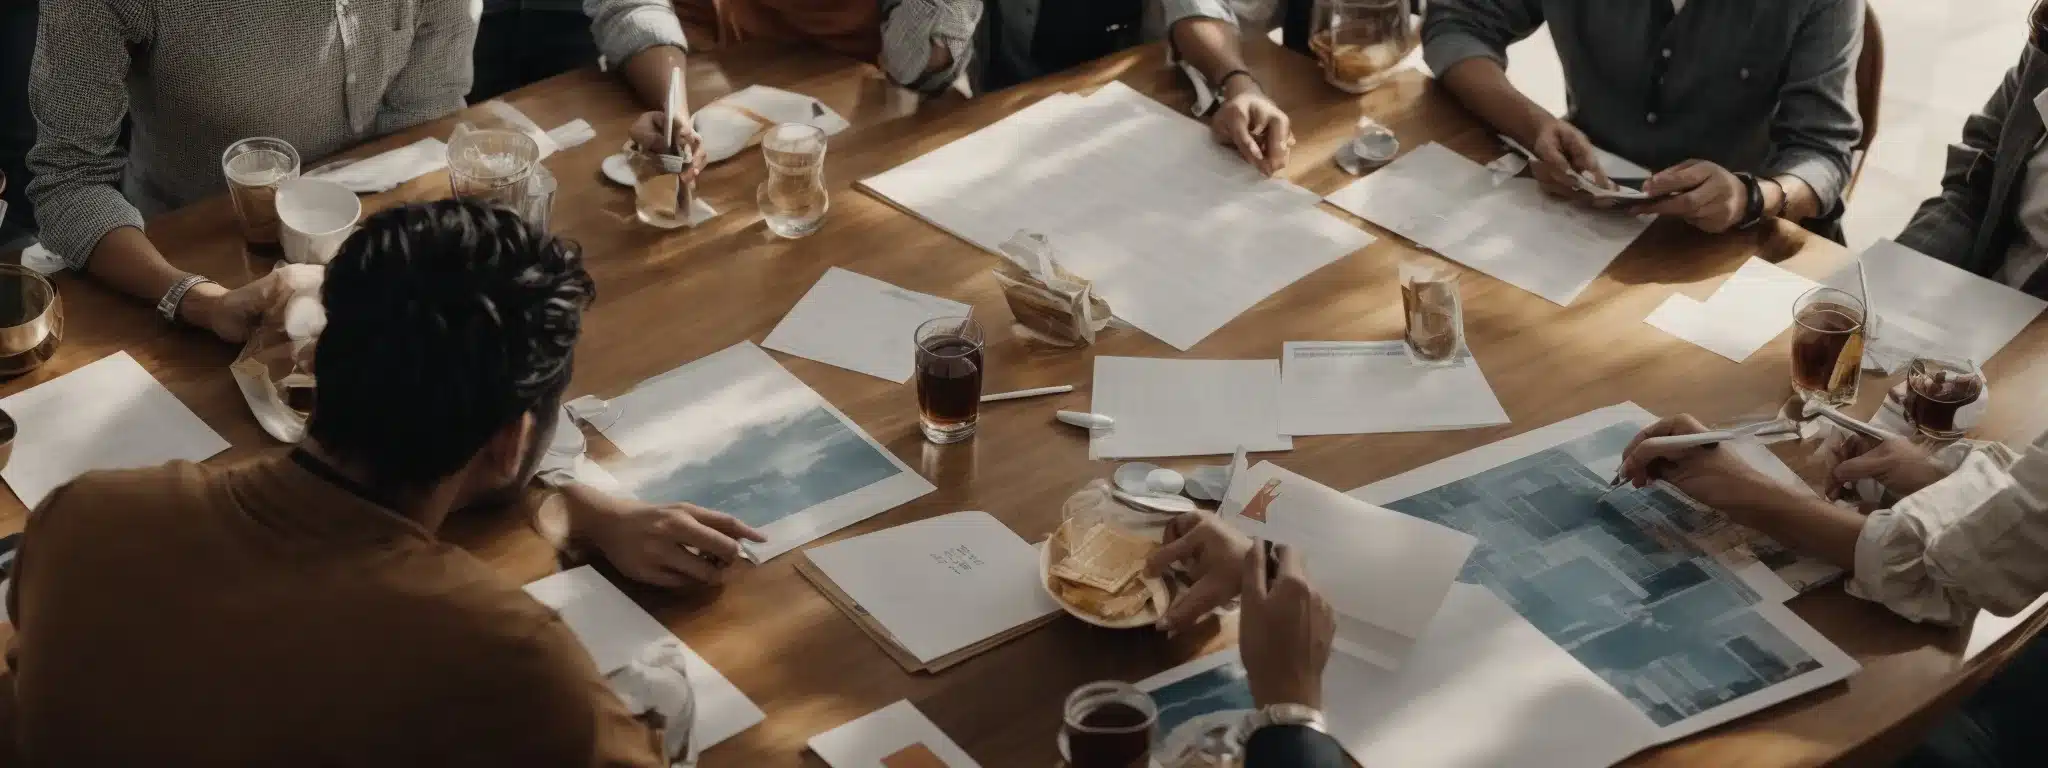 A Group Of Marketers Gathered Around A Table, Discussing Strategies Over Charts And Graphs, Evoking The Spirit Of Navigation And Discovery In Refining Their Brand'S Value Proposition.